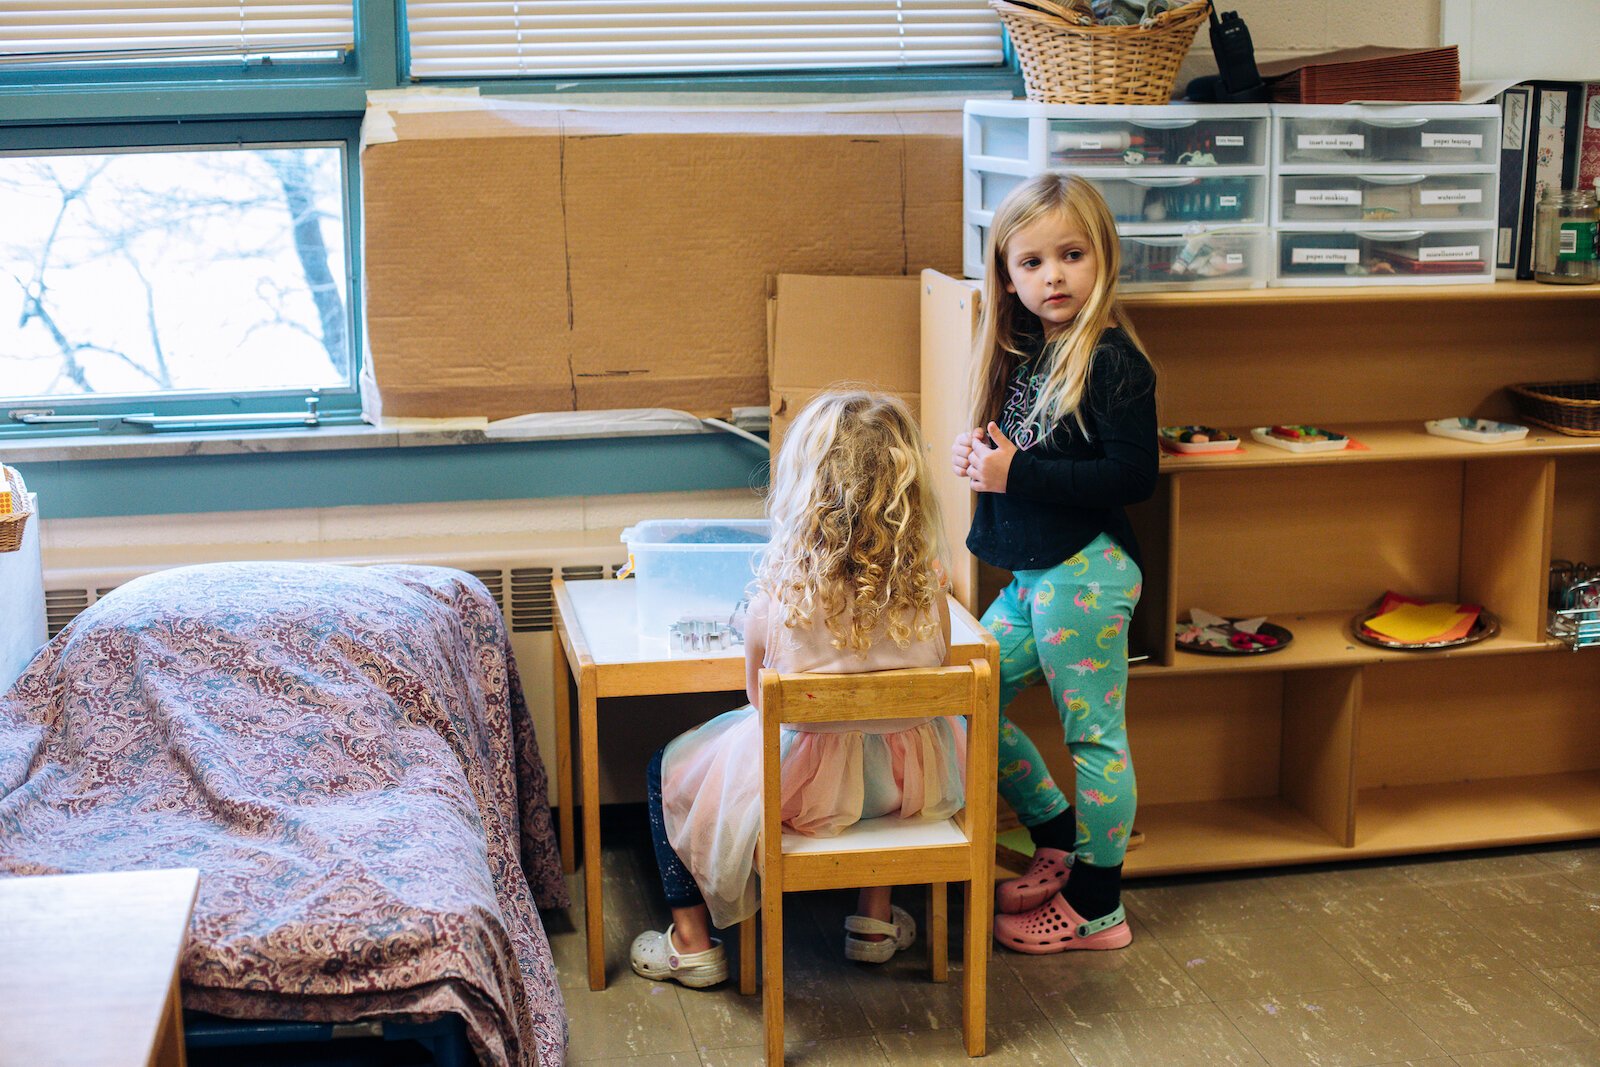 Montessori Education allows children to choose how to engage with the class environment, which is composed of purposefully designed activities.